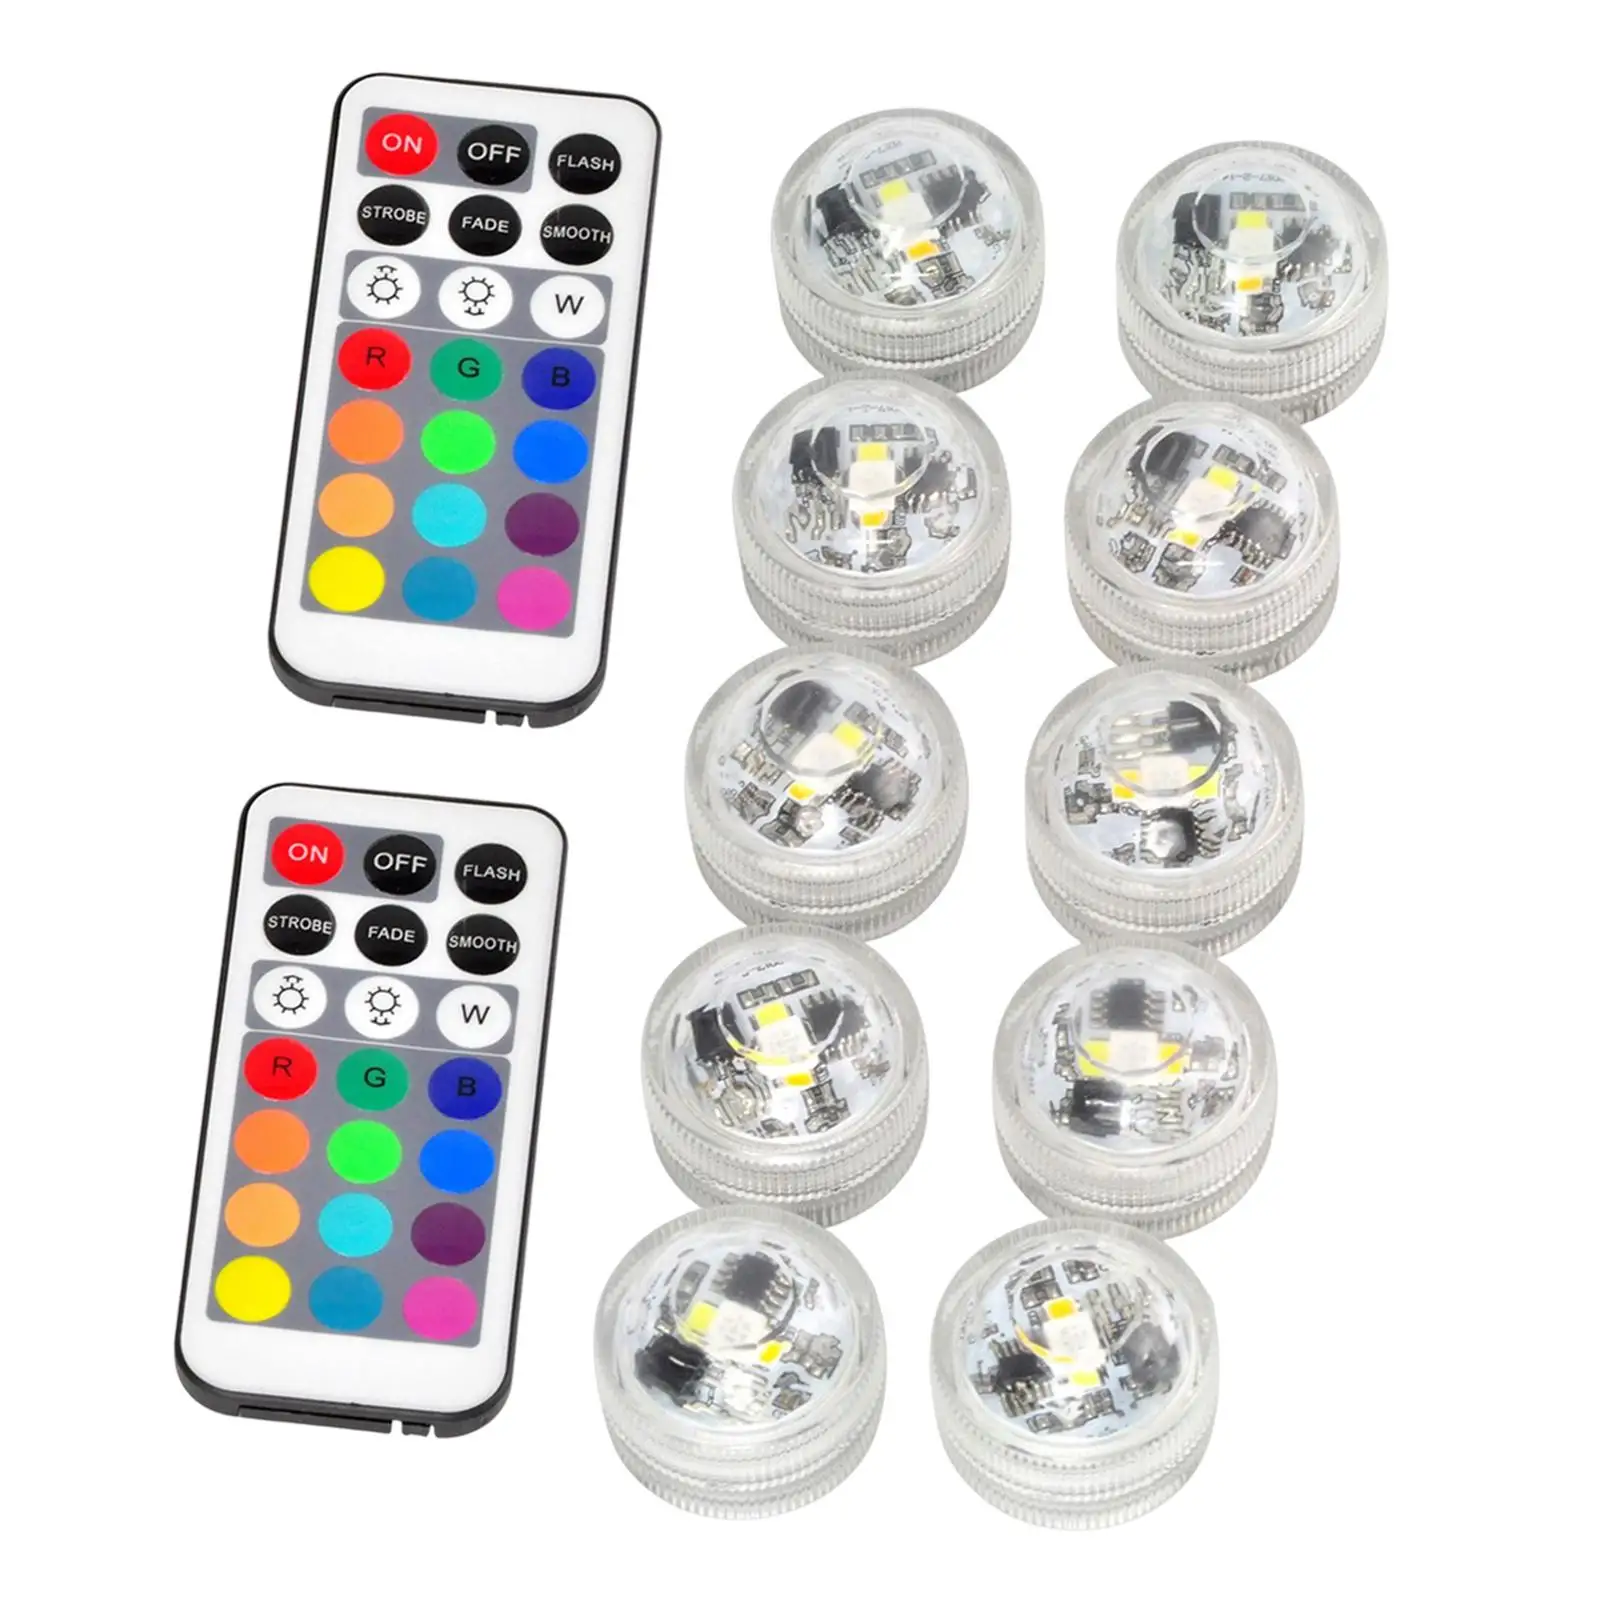 10 Pieces Fish Tank LED Lights Submersible Remote Control RGB Lamp Waterproof IP65 for Wedding Hot Tub Bath Fountains Pond